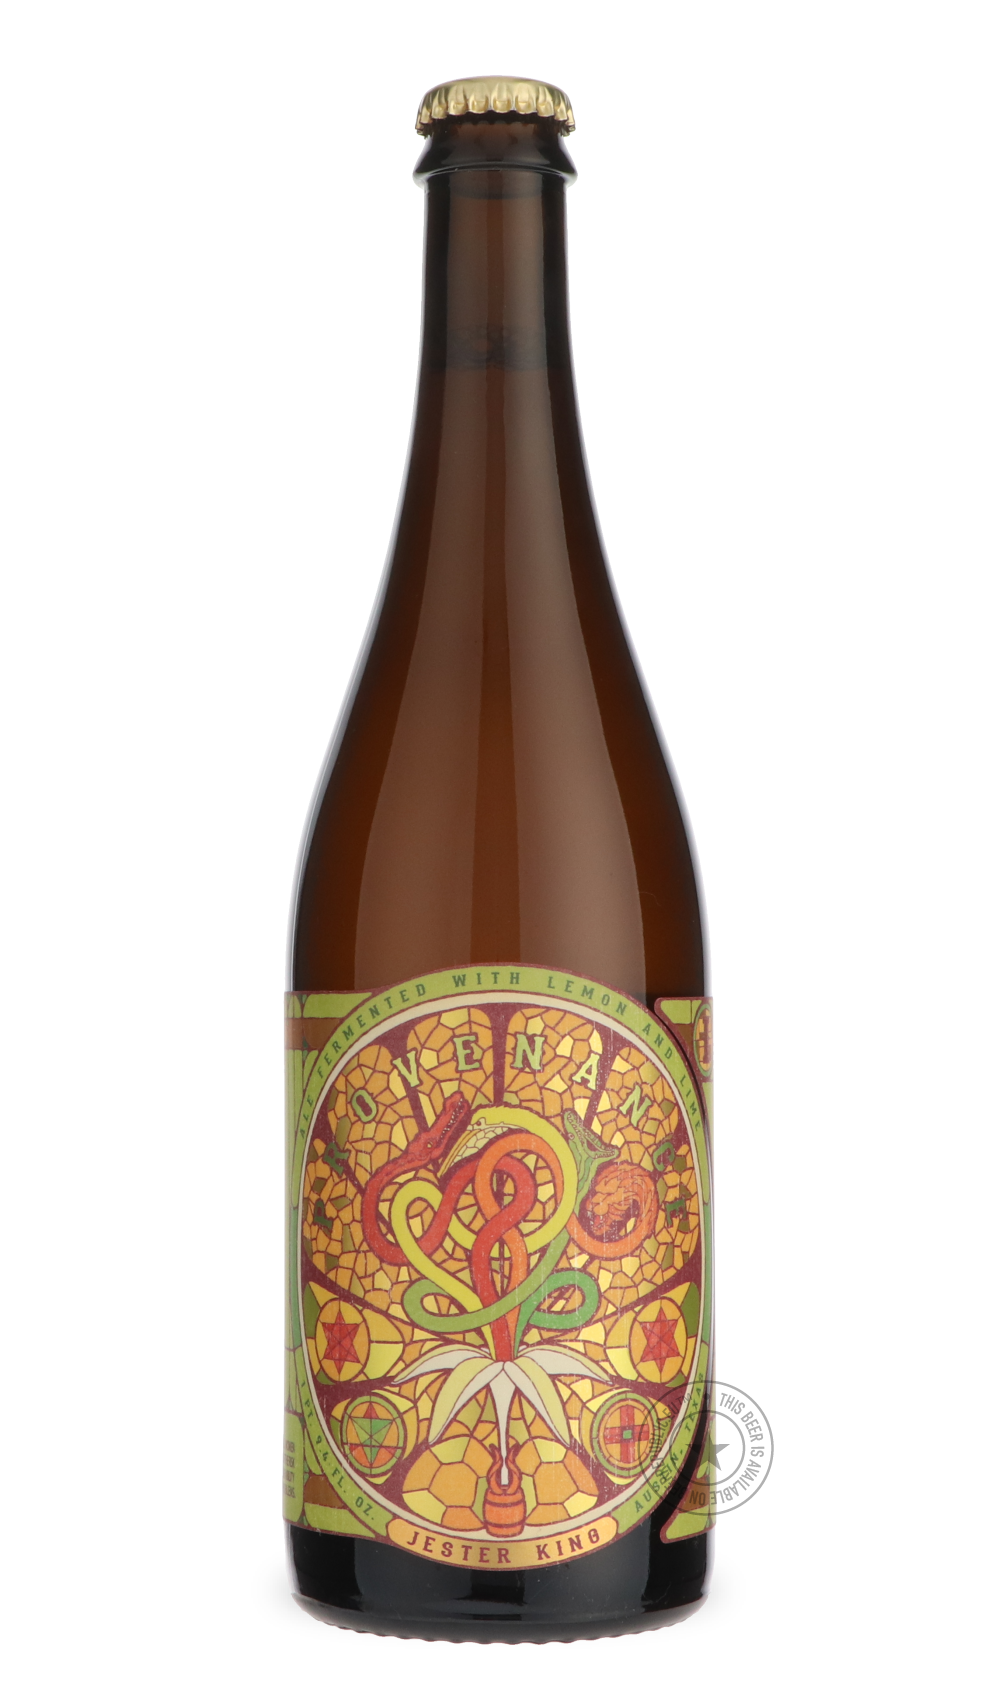 -Jester King- Provenance Lemon & Lime Batch #3-Sour / Wild & Fruity- Only @ Beer Republic - The best online beer store for American & Canadian craft beer - Buy beer online from the USA and Canada - Bier online kopen - Amerikaans bier kopen - Craft beer store - Craft beer kopen - Amerikanisch bier kaufen - Bier online kaufen - Acheter biere online - IPA - Stout - Porter - New England IPA - Hazy IPA - Imperial Stout - Barrel Aged - Barrel Aged Imperial Stout - Brown - Dark beer - Blond - Blonde - Pilsner - La